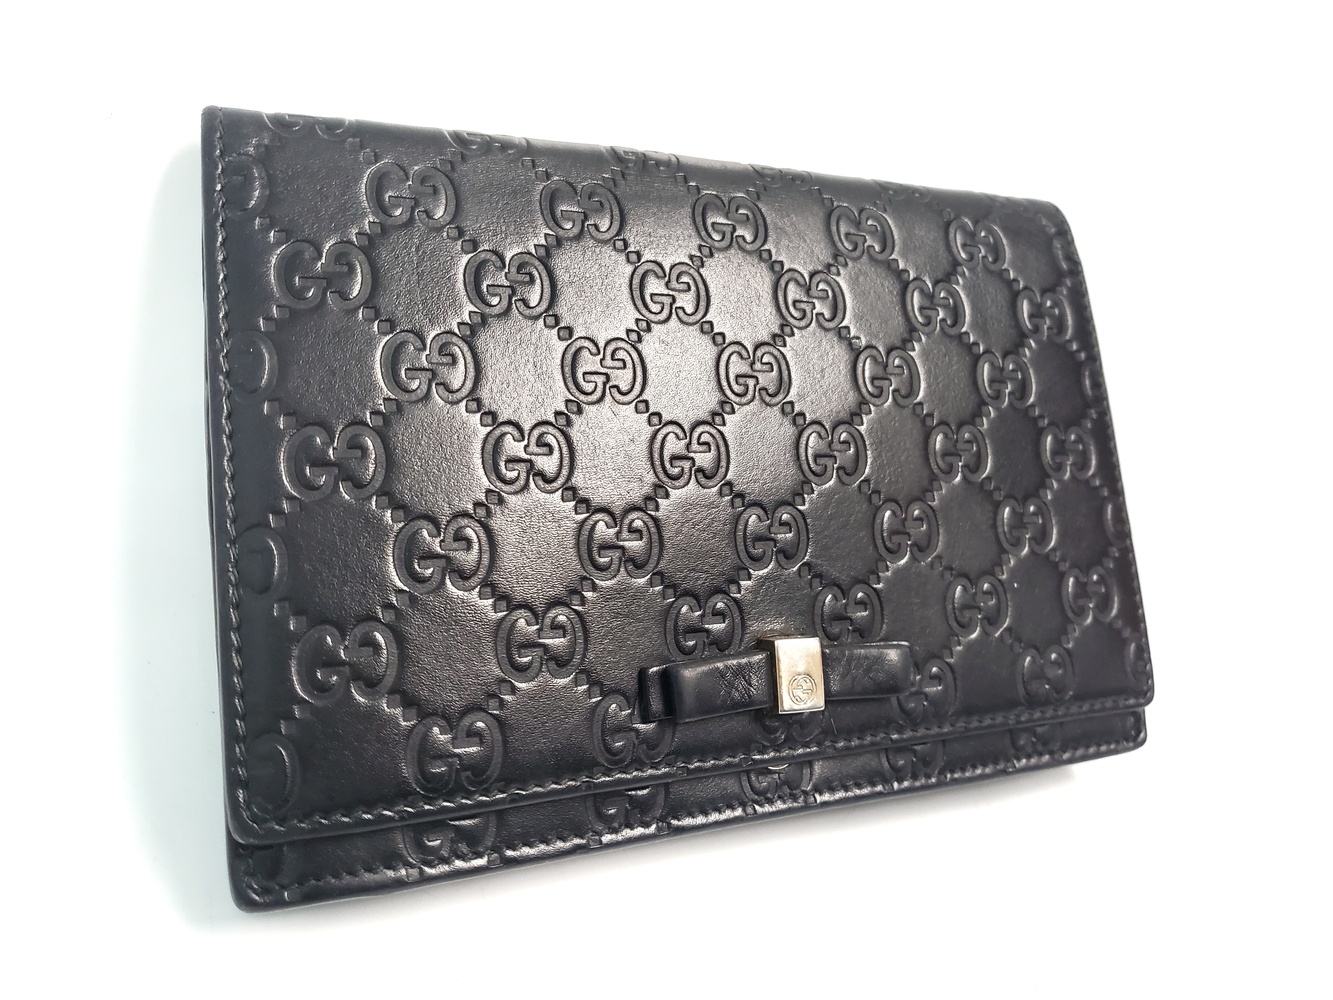 Gucci Black Guccissima Leather Bow Flap Wallet on Chain (Missing Chain) 